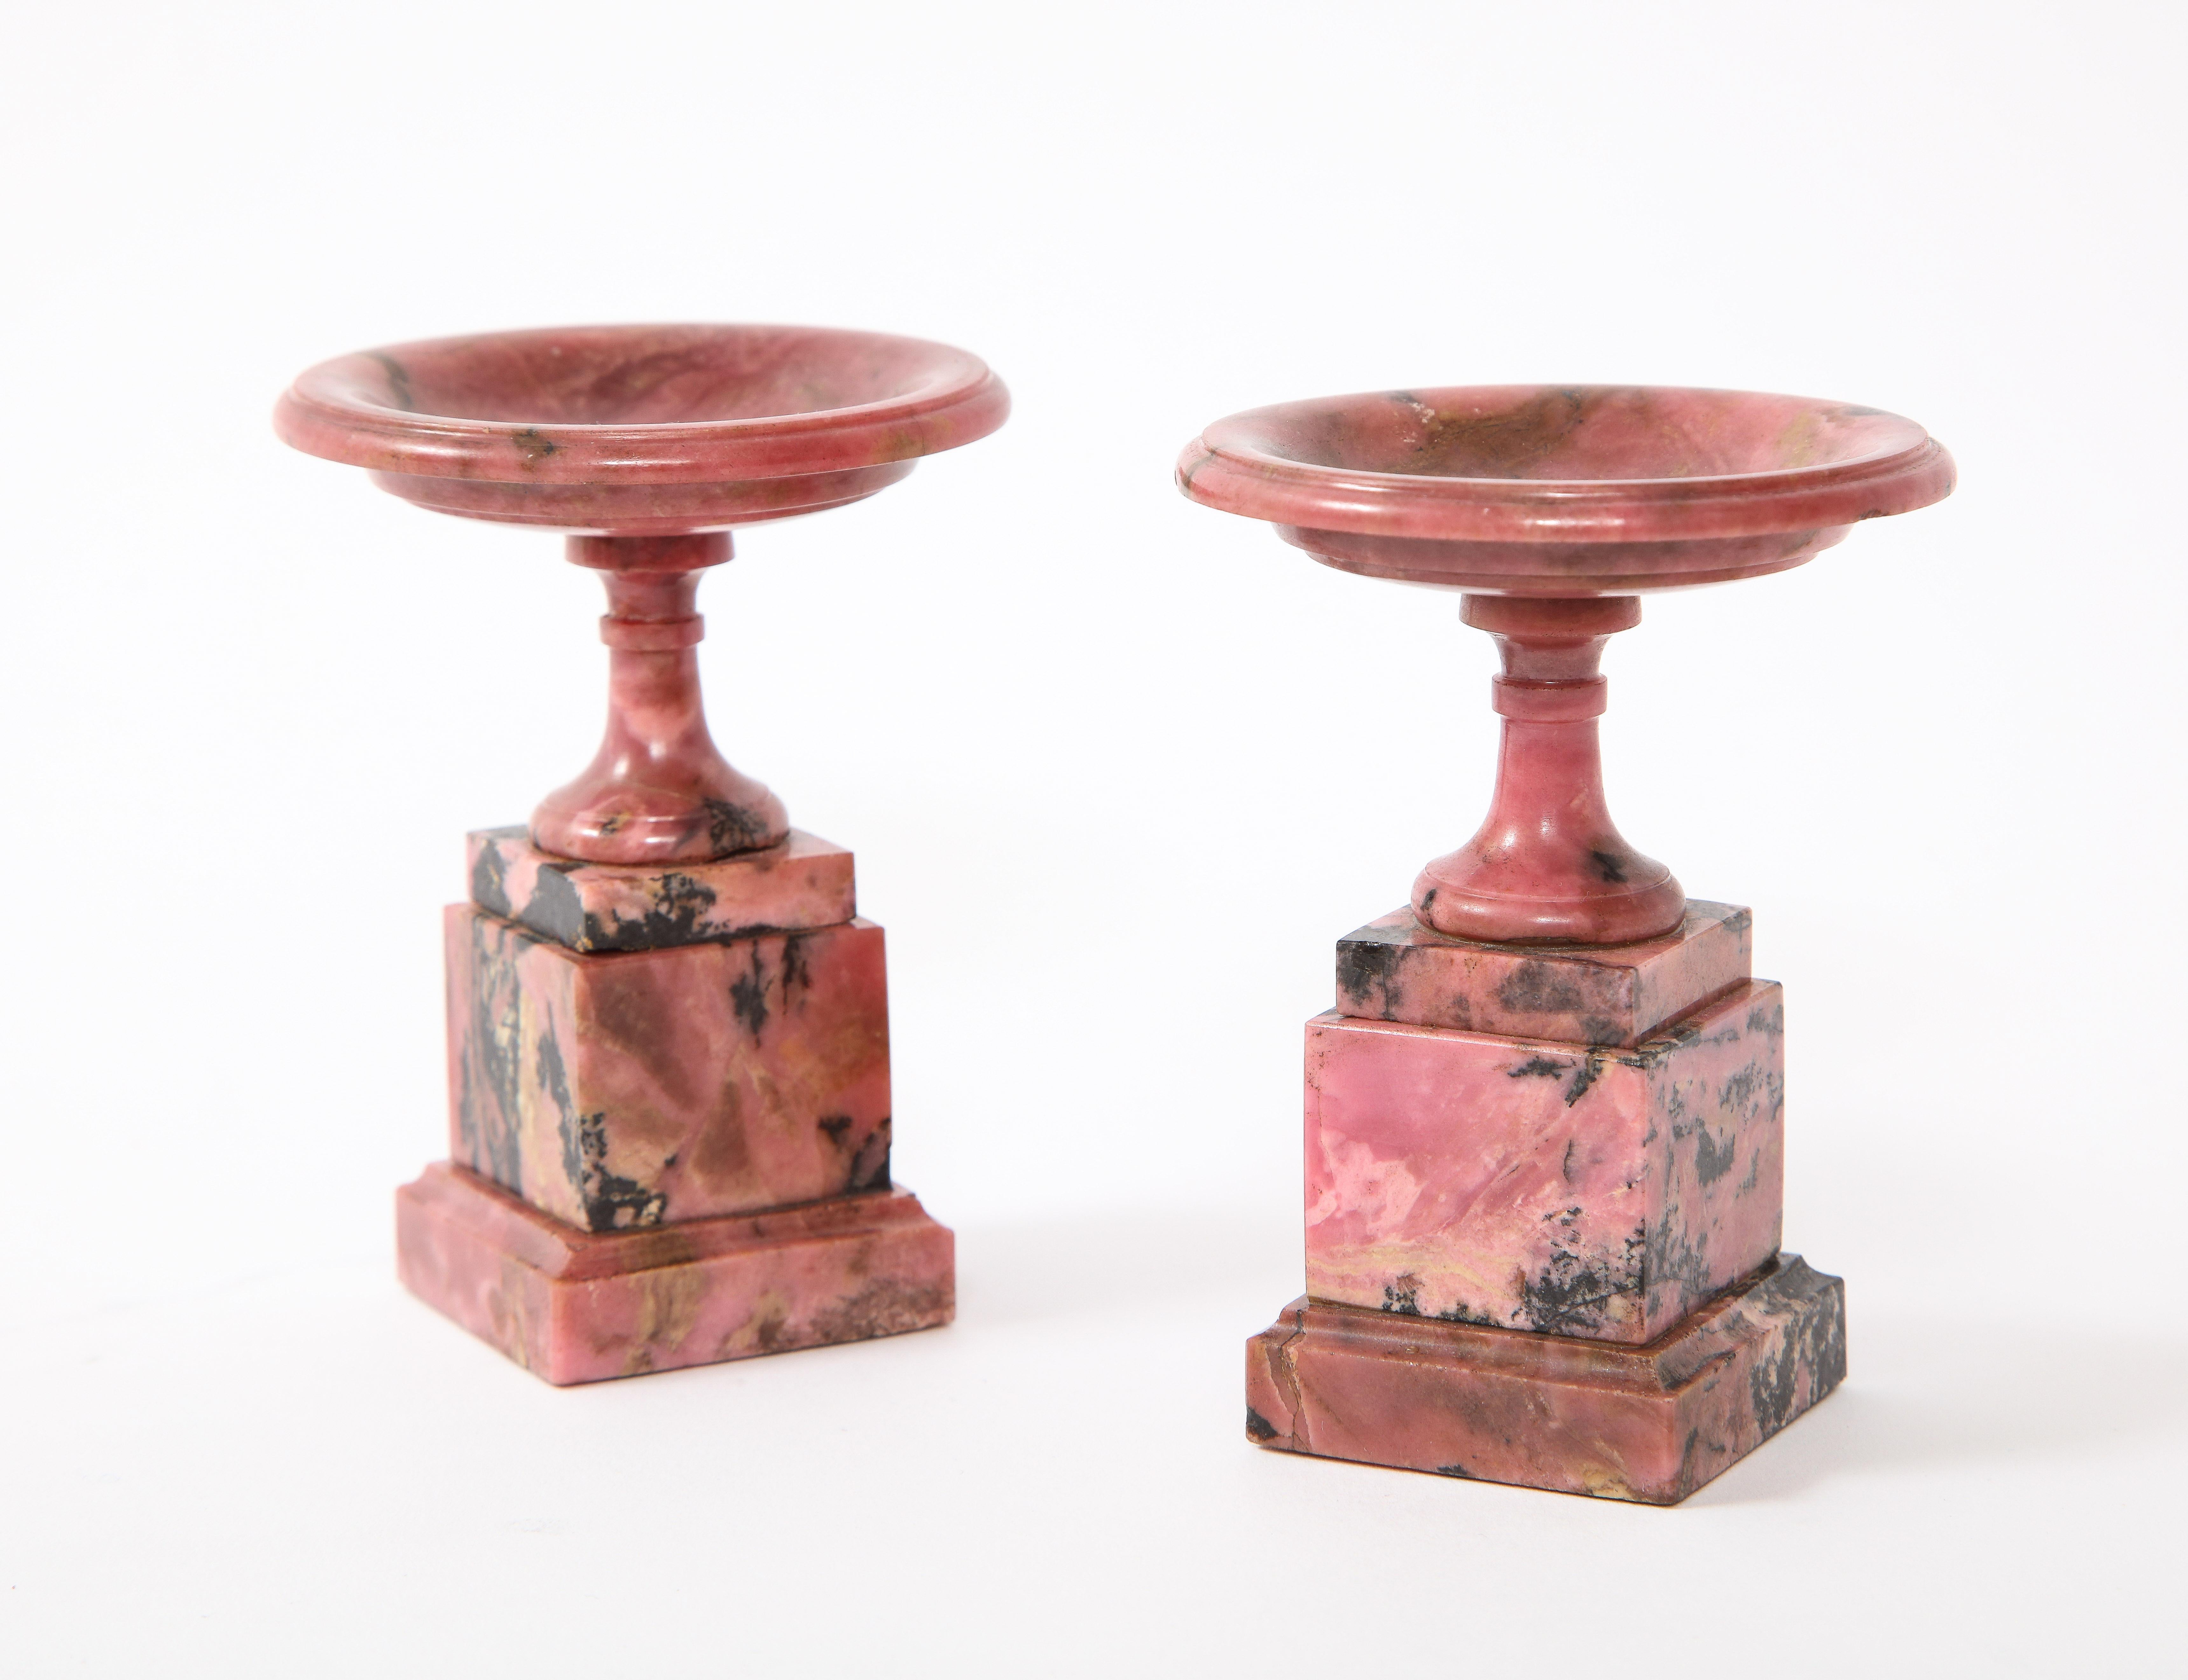 Hand-Carved Rare Pair of Early 19th Century Russian Hand Carved Rhodonite Tazzas